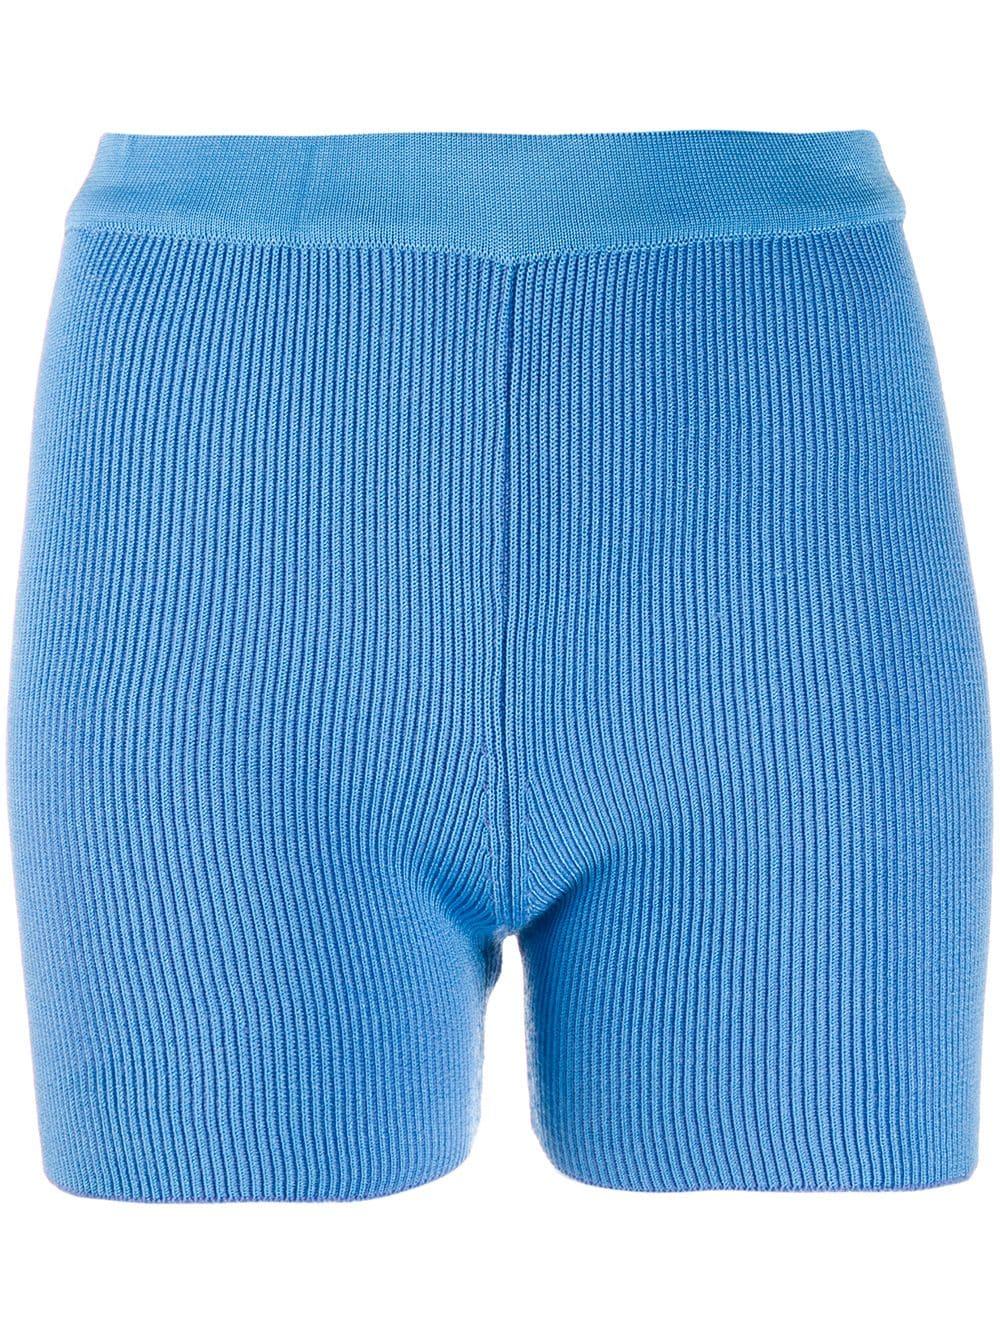 Jacquemus Wool Fitted Ribbed Shorts in Blue - Lyst